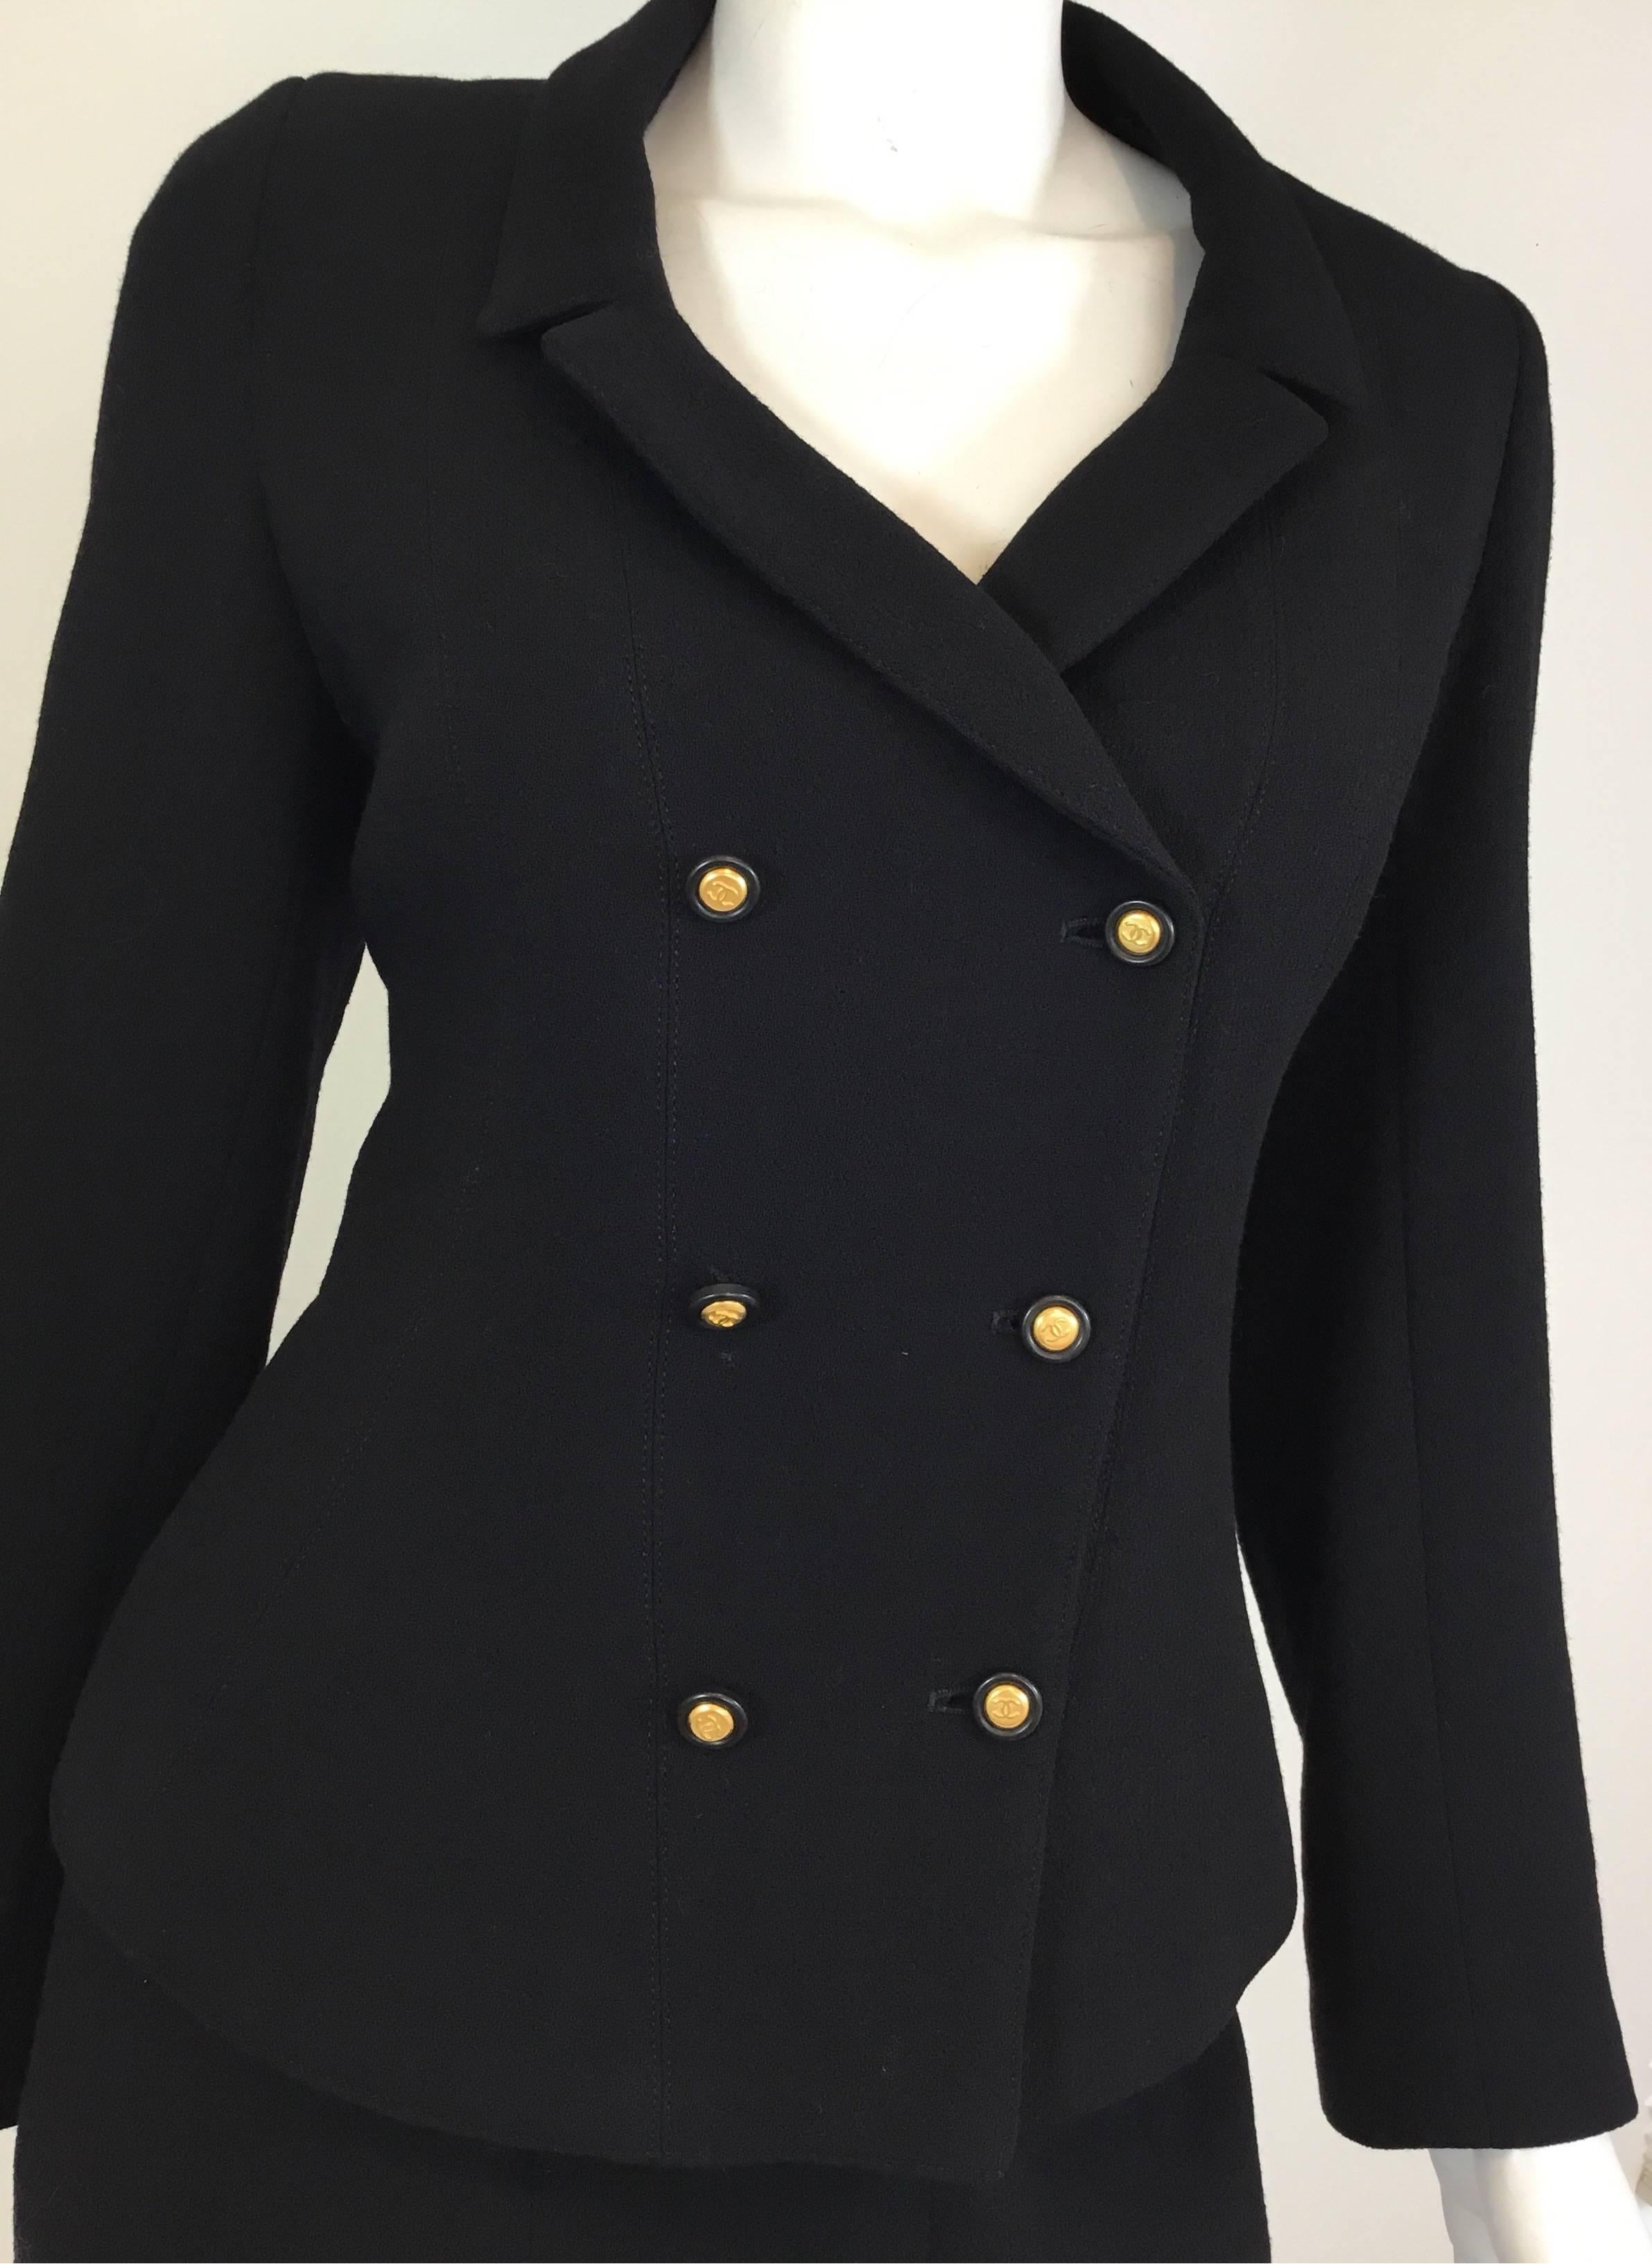 Chanel vintage skirt suit in black with signature black gold button fatsenings throughout. Jacket has button front closures and also on the cuffs of the sleeve. Skirt has a back zipper fastening and buttons at the hem. Suit is fully lined in a silk